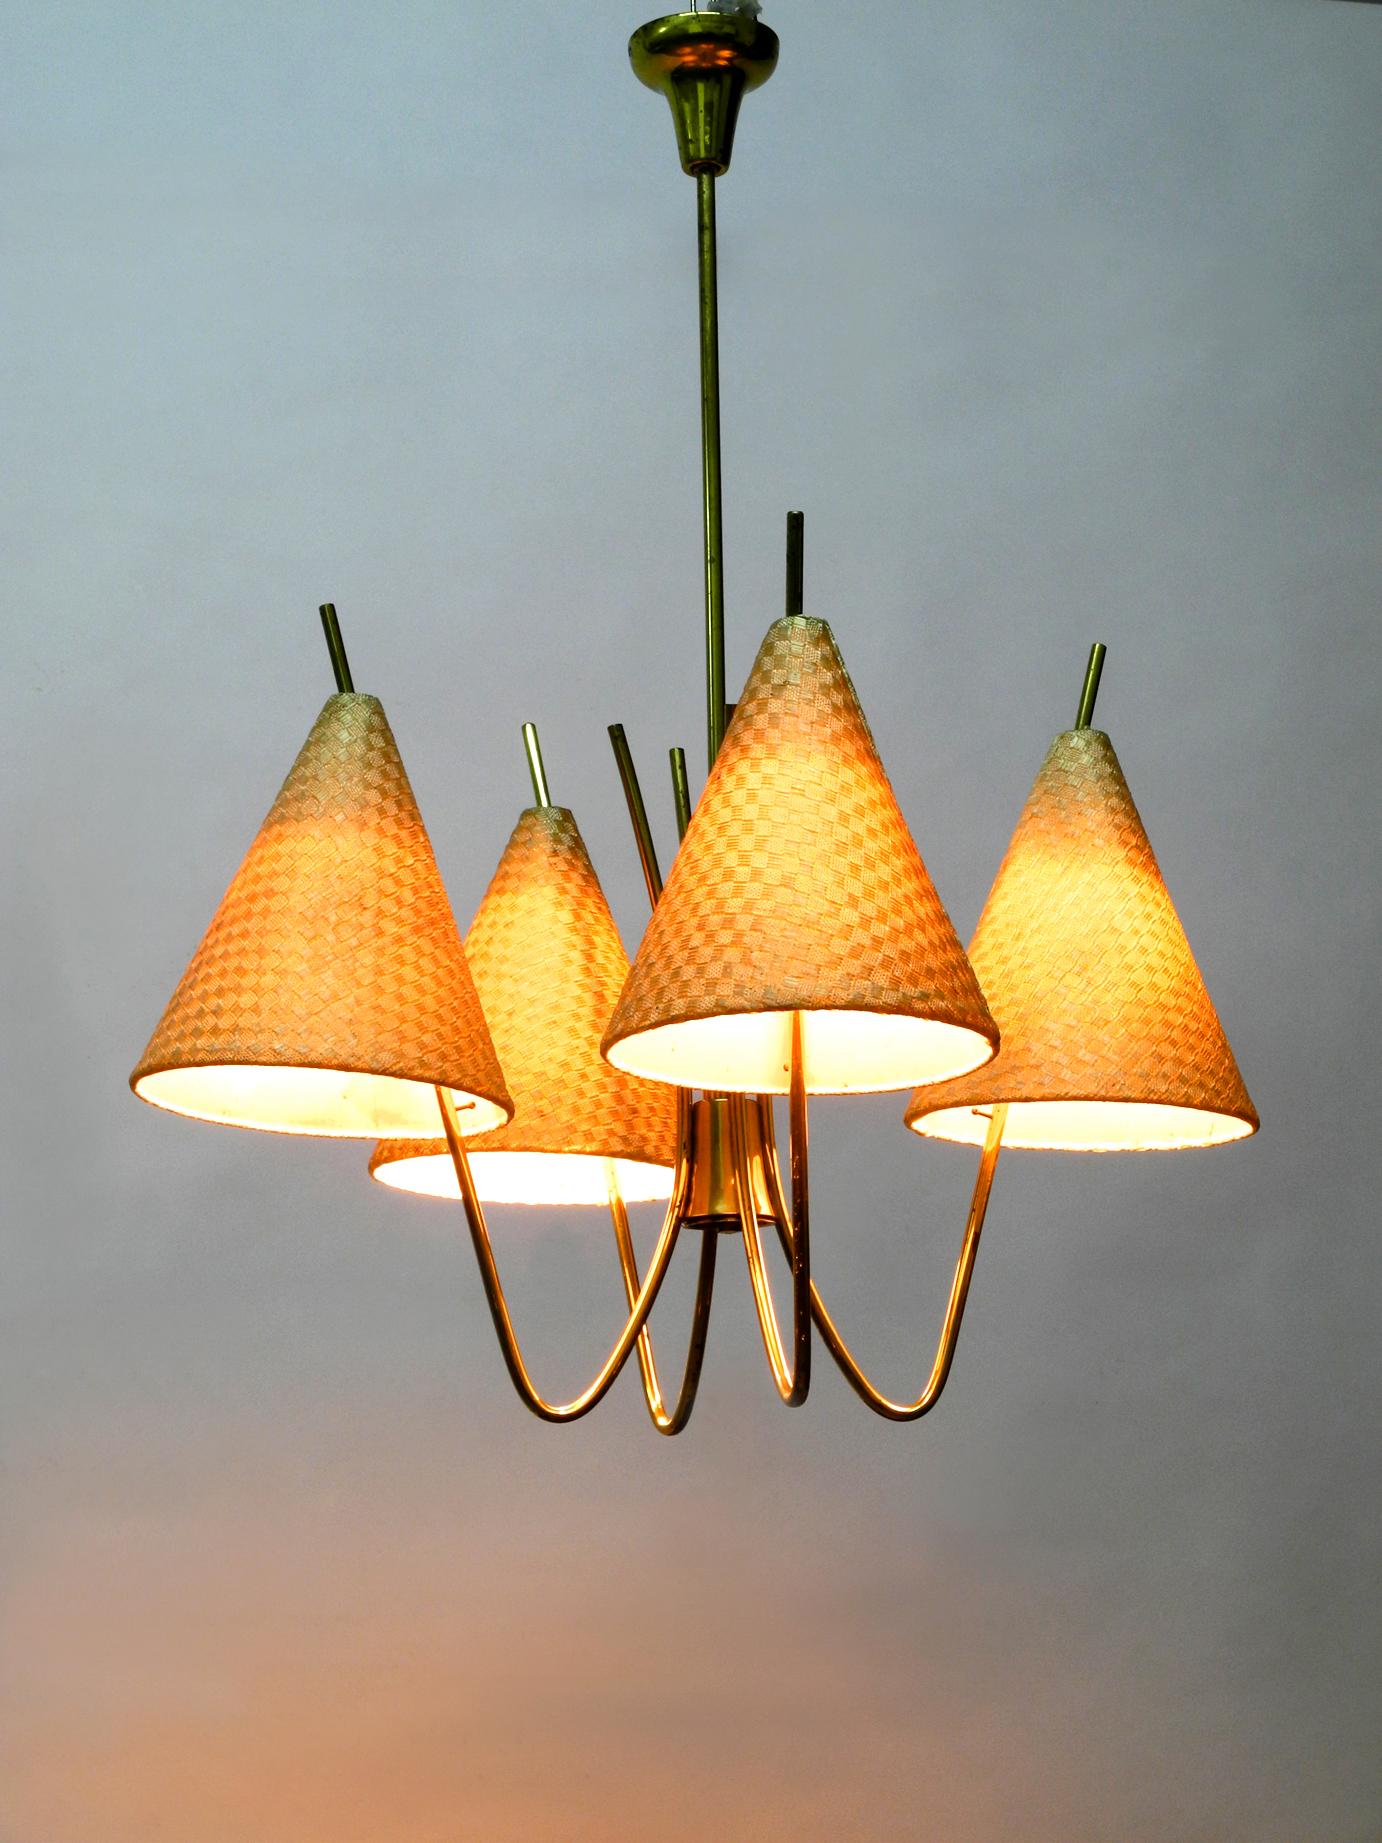 Mid-Century Modern 1960s Brass Ceiling Lamp with Bast Shades by J. T. Kalmar Made in Austria